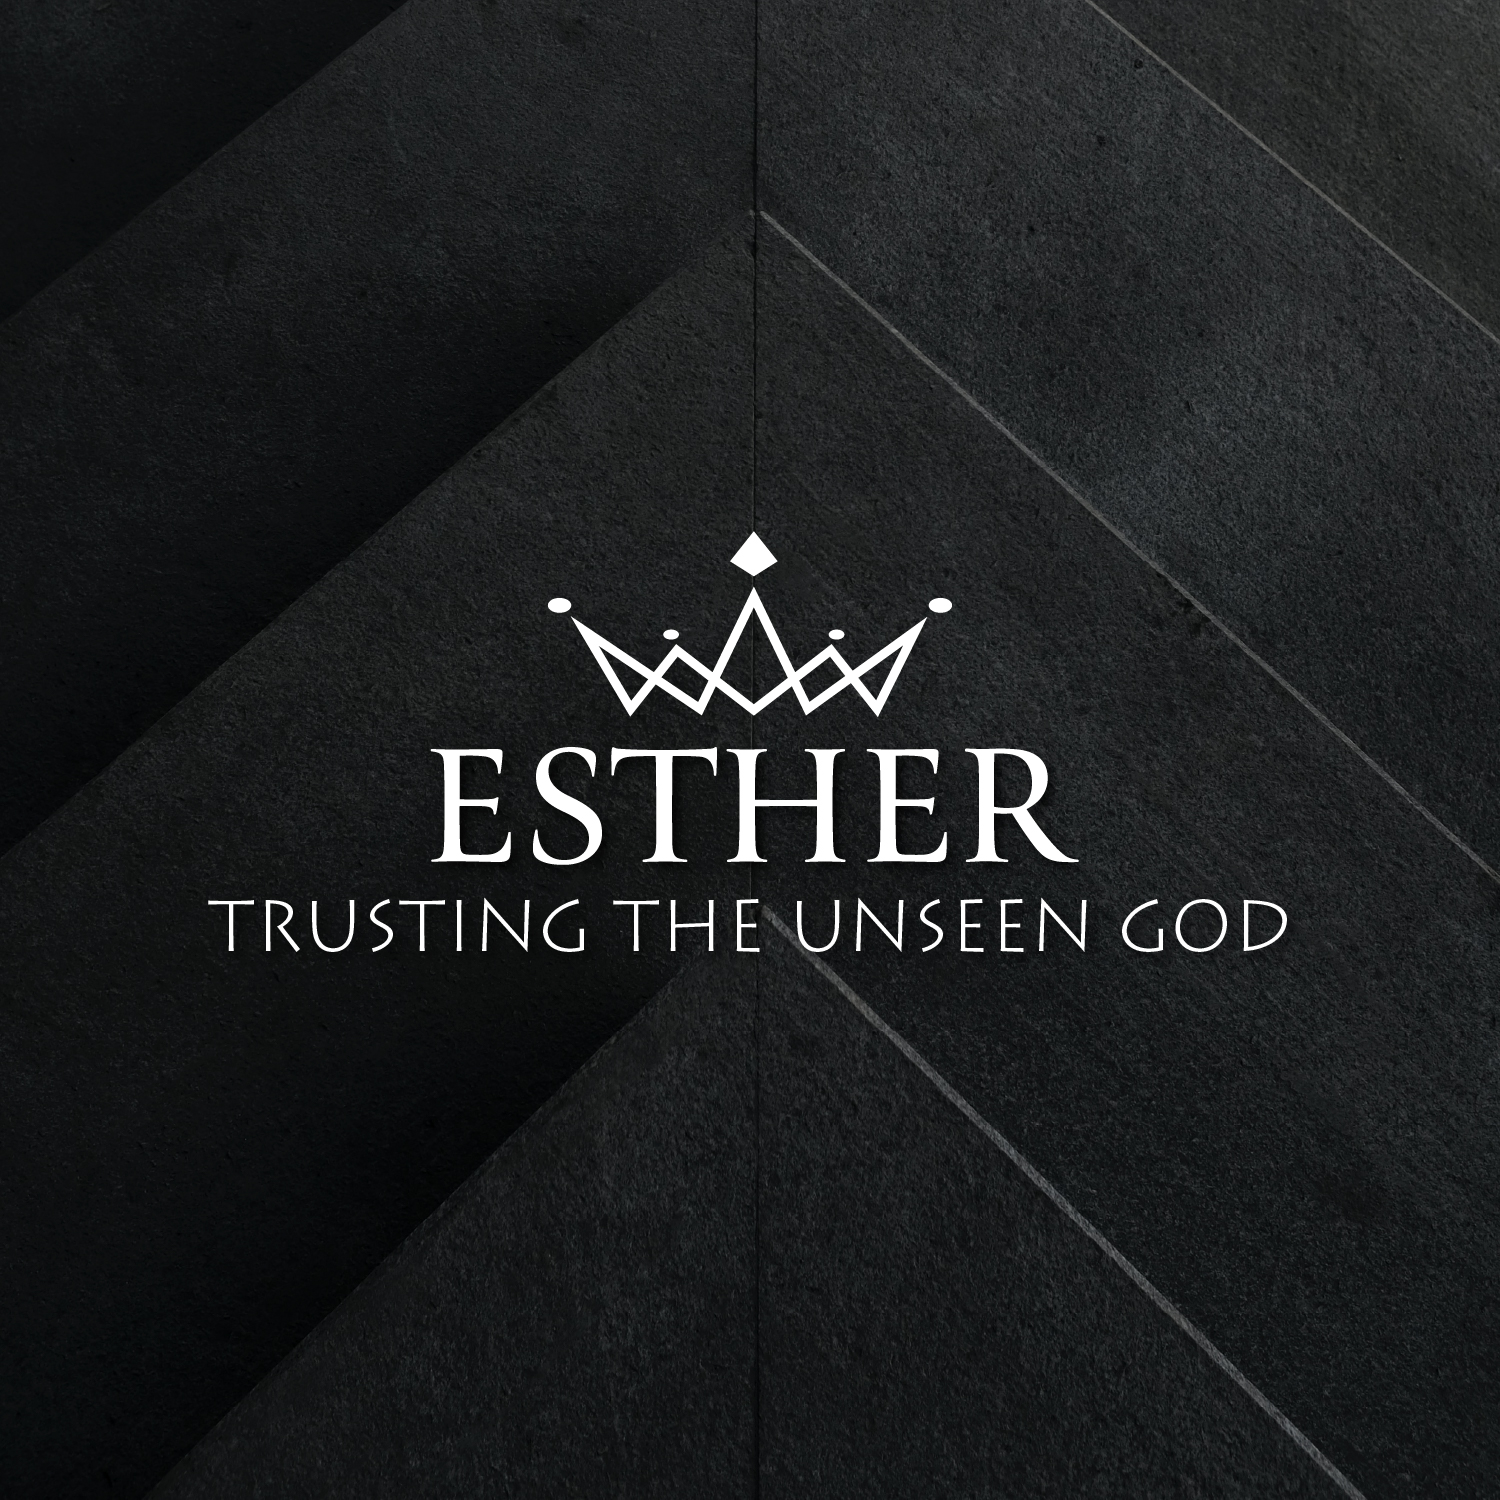 Esther 4:1-17: For such a time as this? (1-22-23)